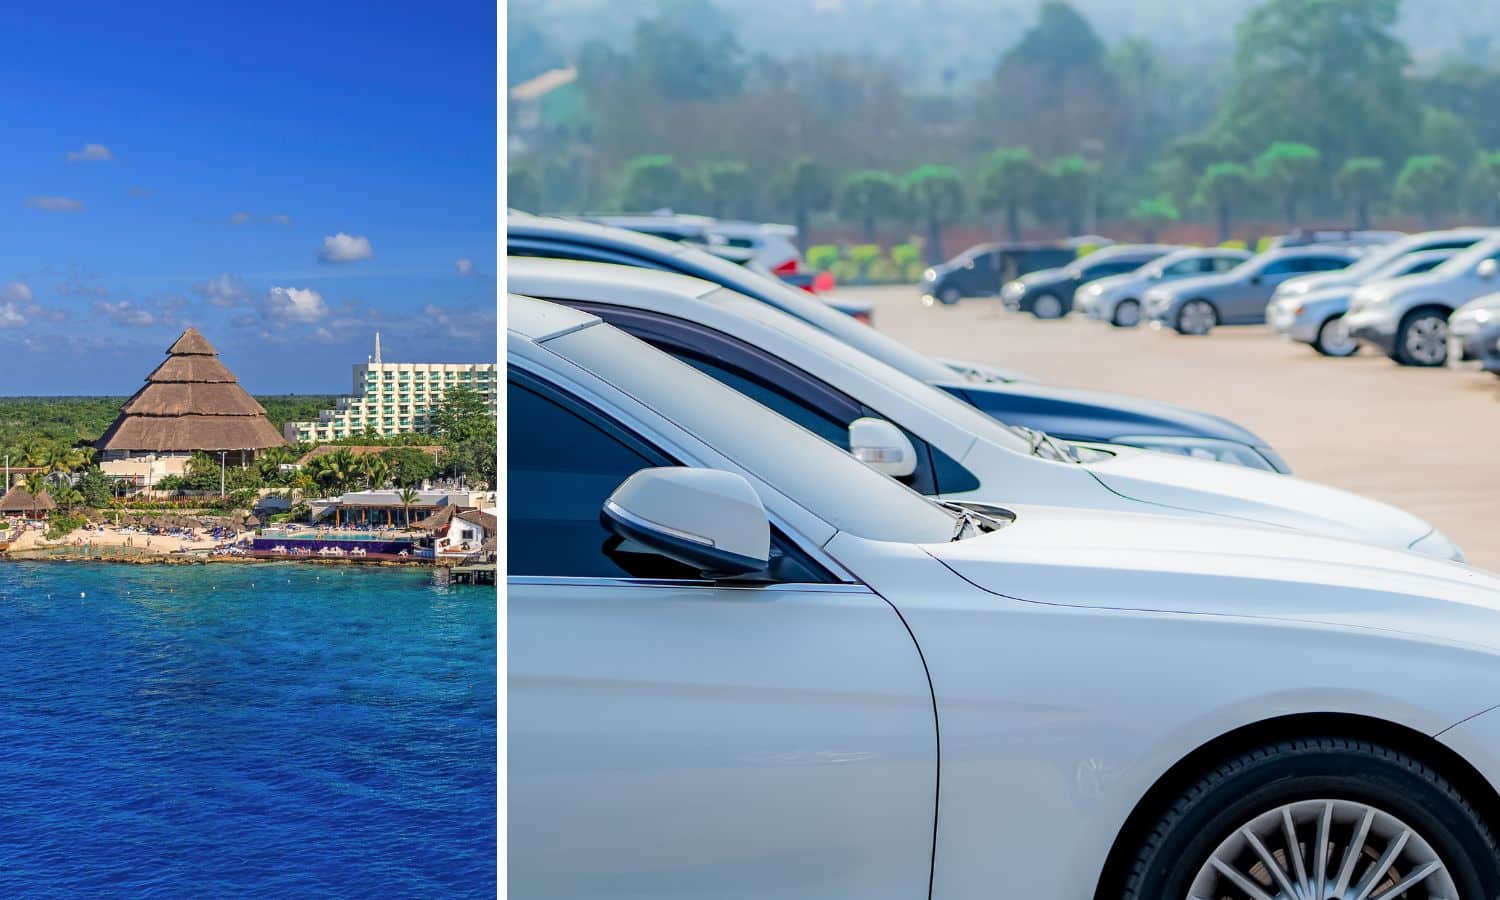 car rentals while on a cruise